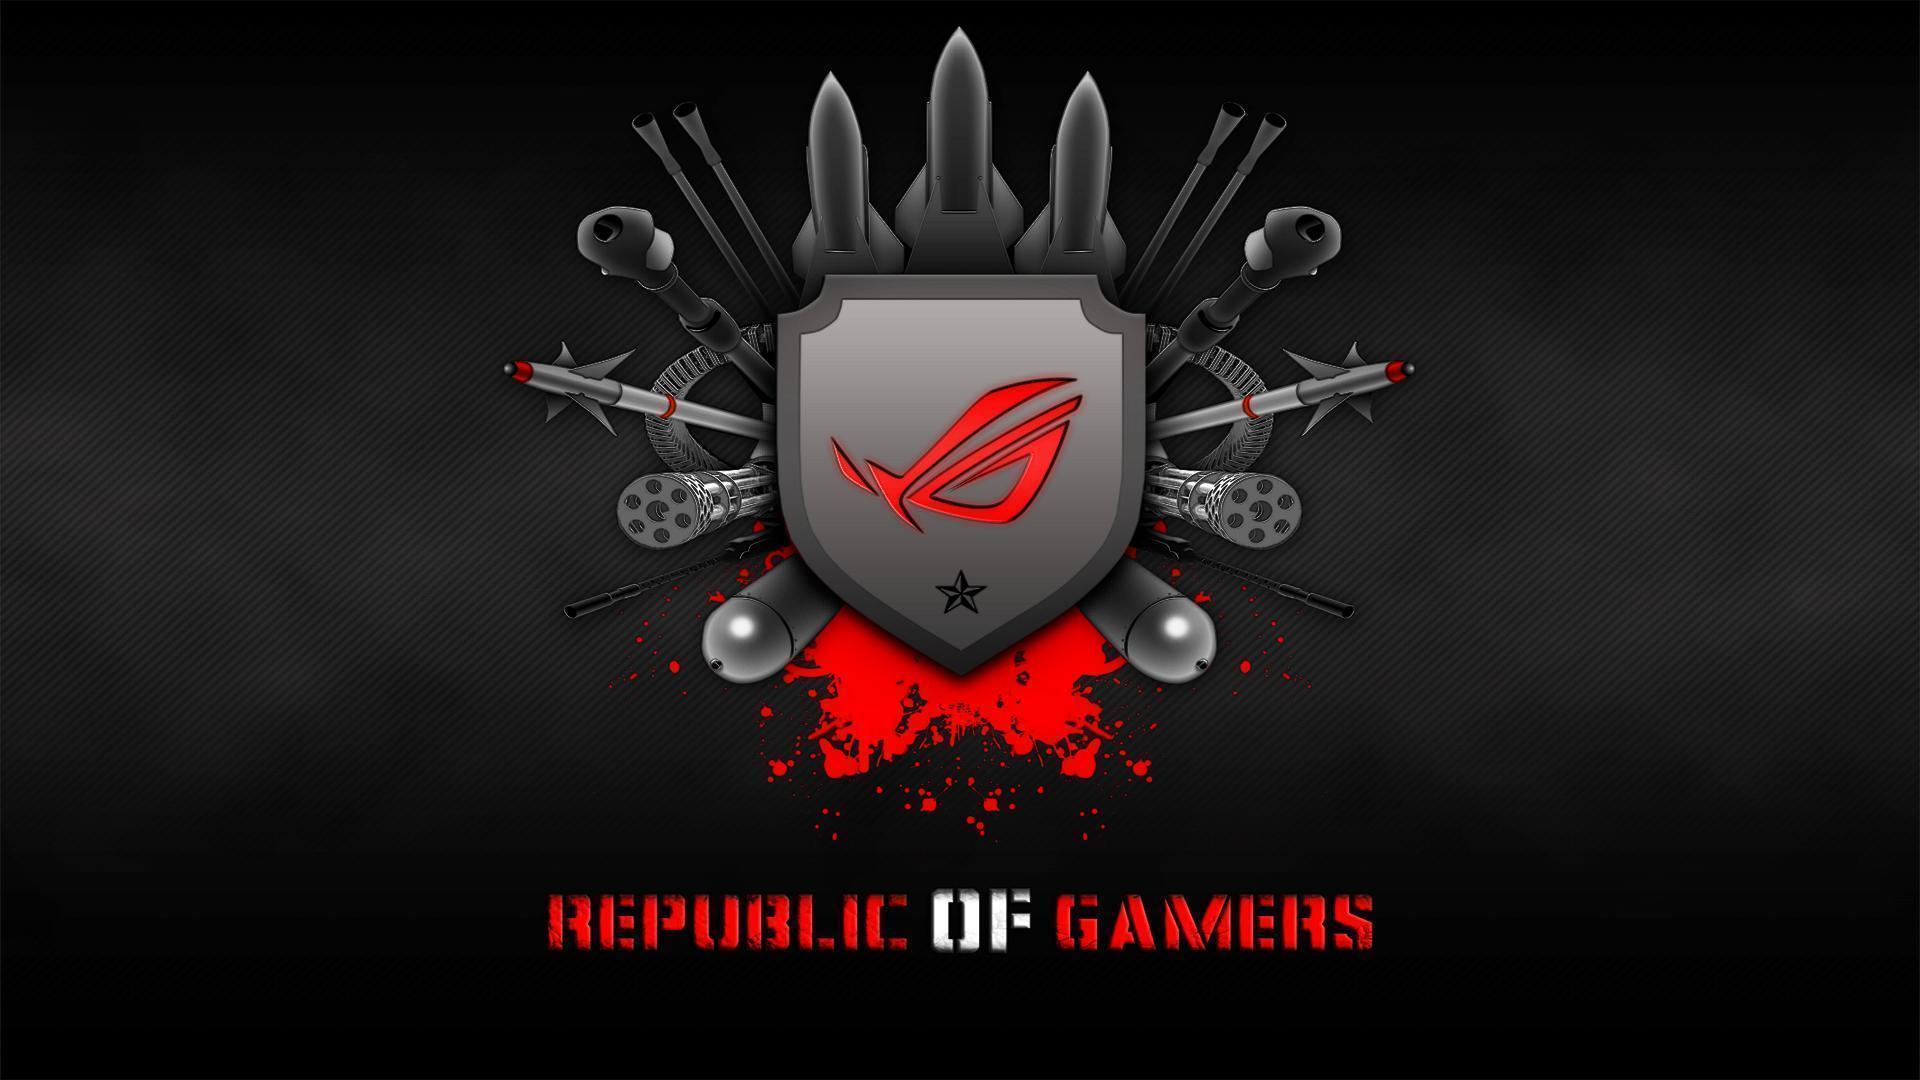 Republic of Gamers Wallpapers #